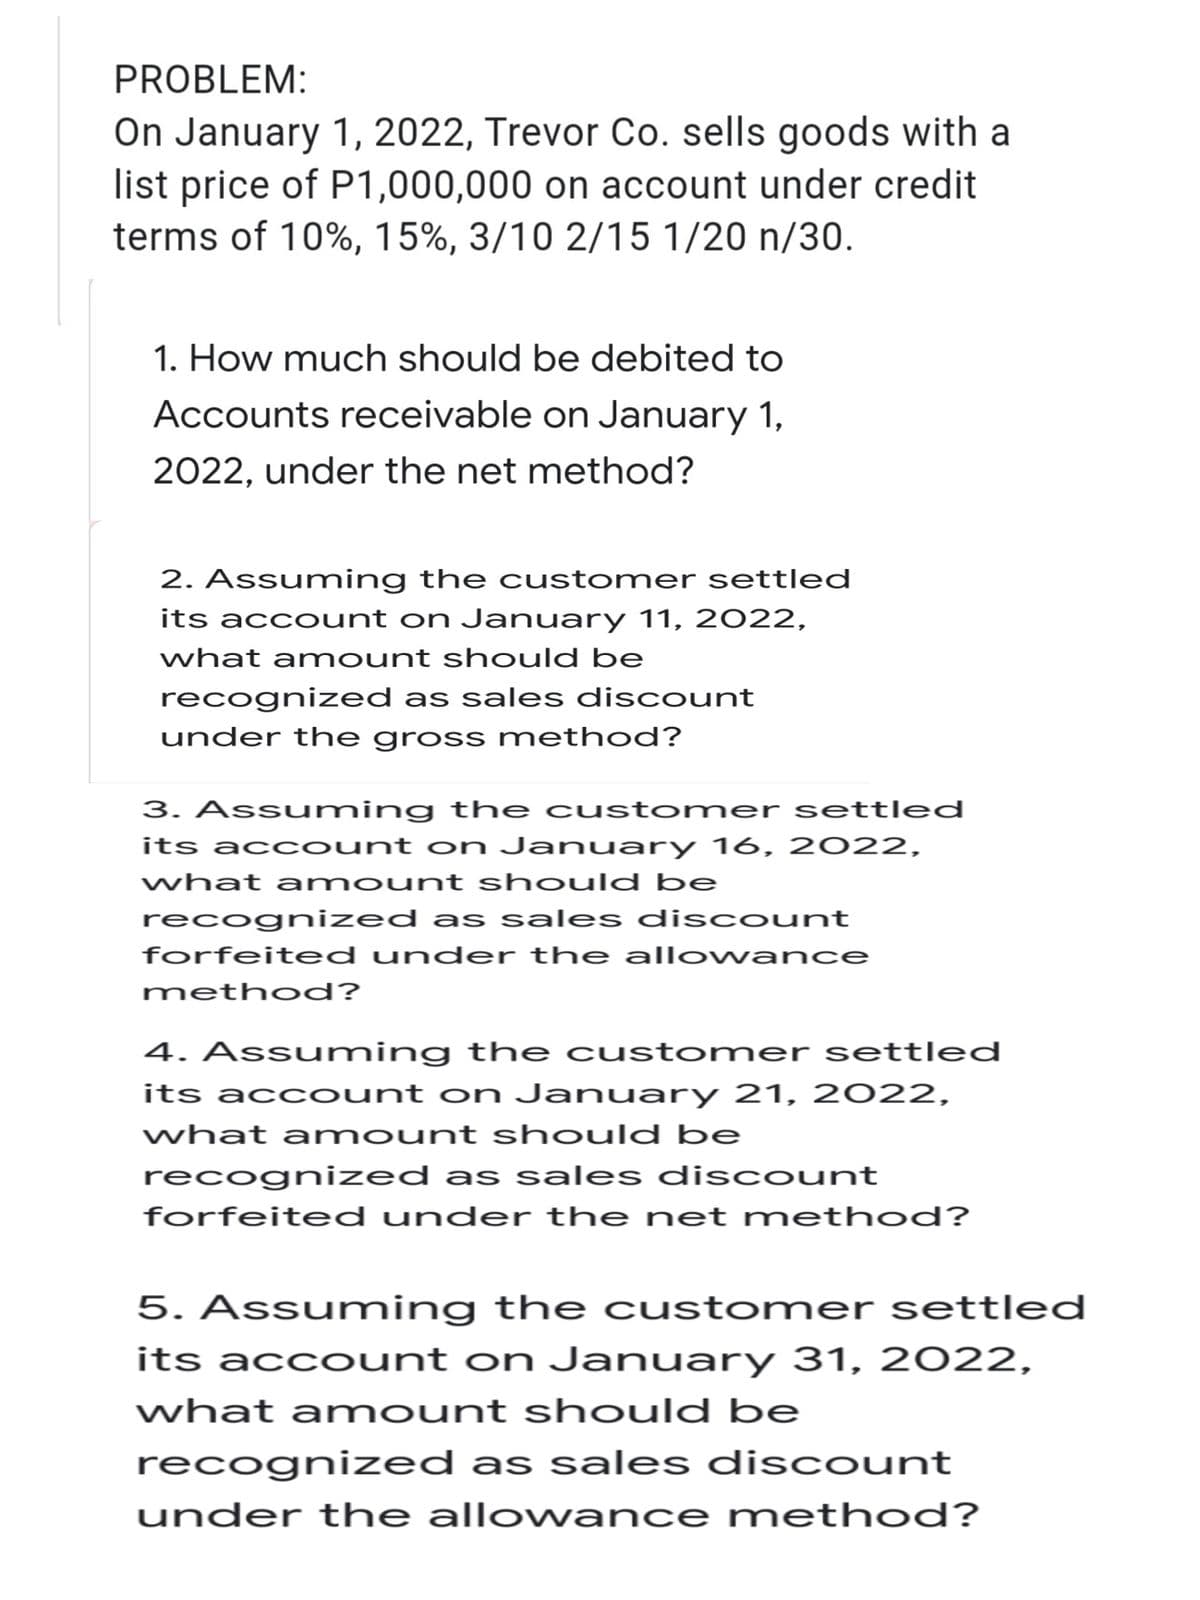 PROBLEM:
On January 1, 2022, Trevor Co. sells goods with a
list price of P1,000,000 on account under credit.
terms of 10%, 15%, 3/10 2/15 1/20 n/30.
1. How much should be debited to
Accounts receivable on January 1,
2022, under the net method?
2. Assuming the customer settled
its account on January 11, 2022,
what amount should be
recognized as sales discount
under the gross method?
3. Assuming the customer settled
its account on January 16, 2022,
what amount should be
recognized as sales discount
forfeited under the allowance
method?
4. Assuming the customer settled
its account on January 21, 2022,
what amount should be
recognized as sales discount
forfeited under the net method?
5. Assuming the customer settled
its account on January 31, 2022,
what amount should be
recognized as sales discount
under the allowance method?